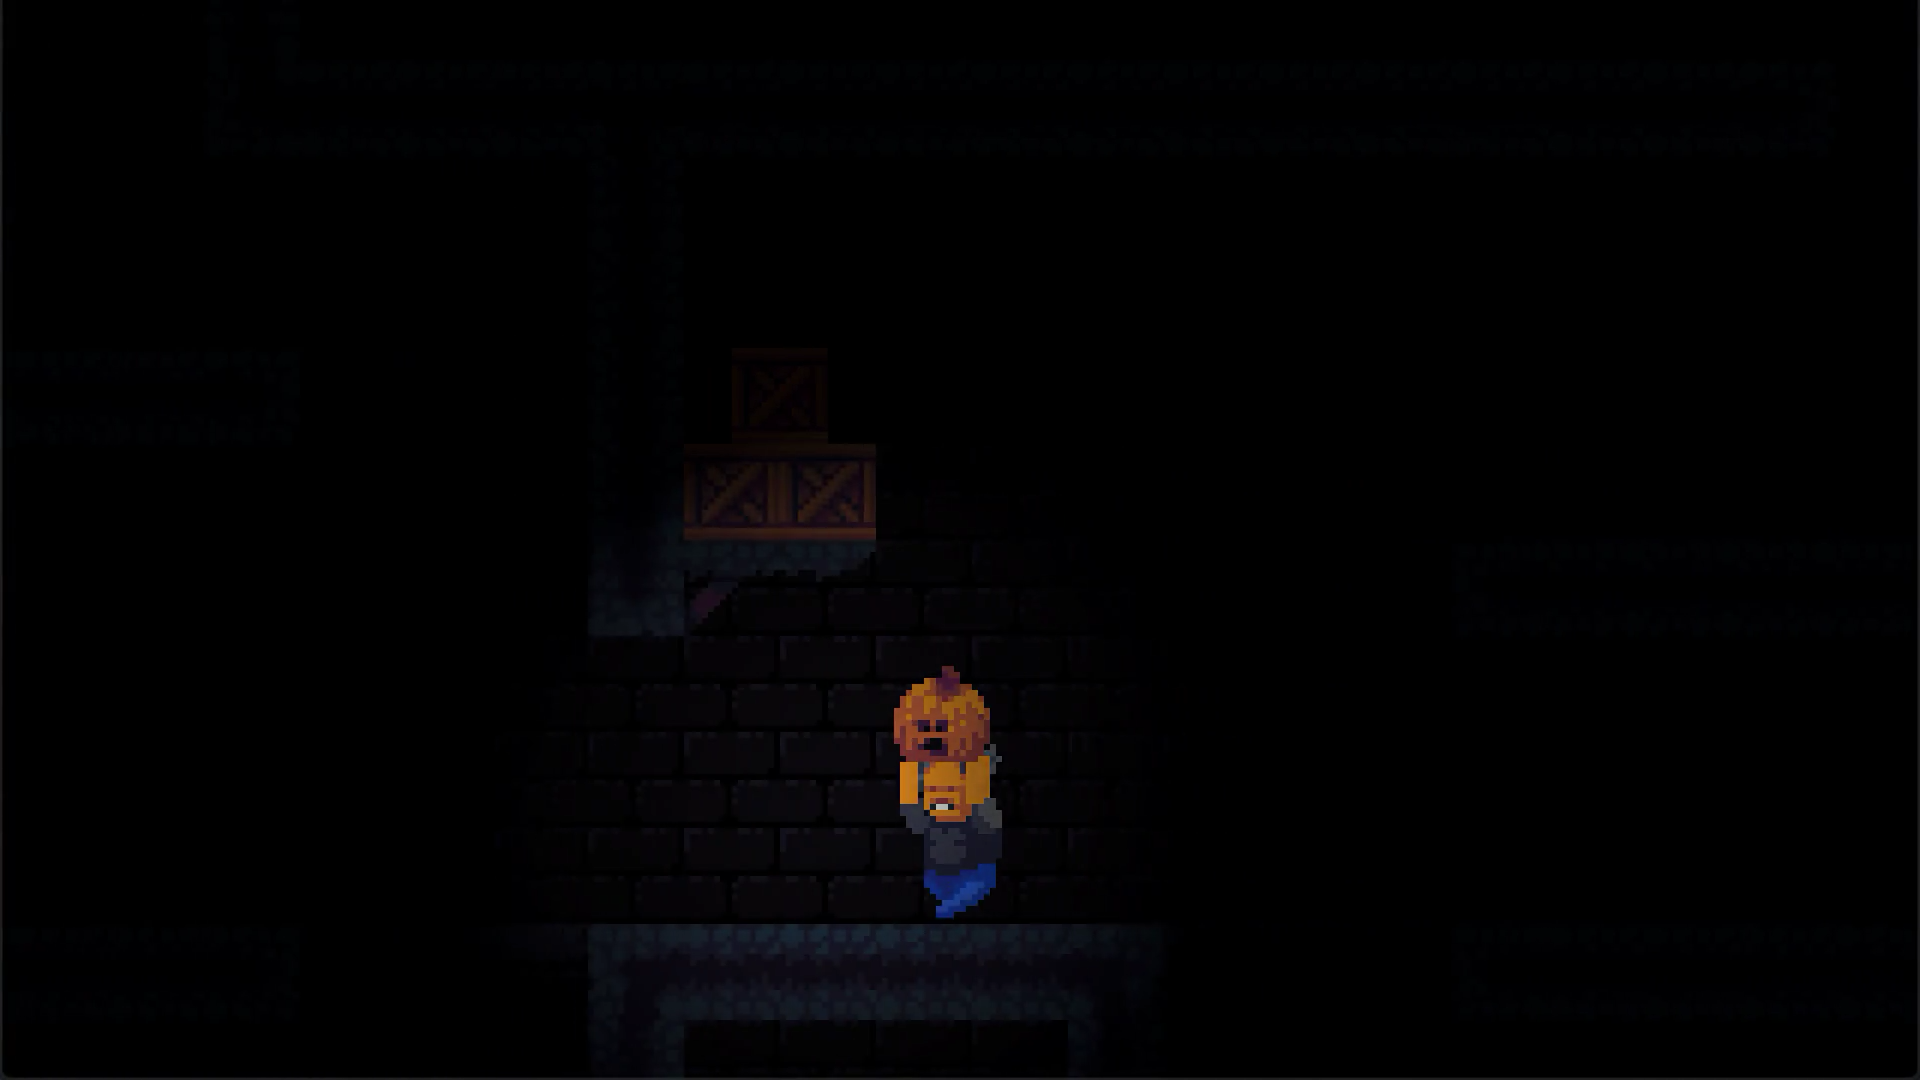 A screenshot of Midnight Manor with the main character holding a pumpkin in a dark cellar.